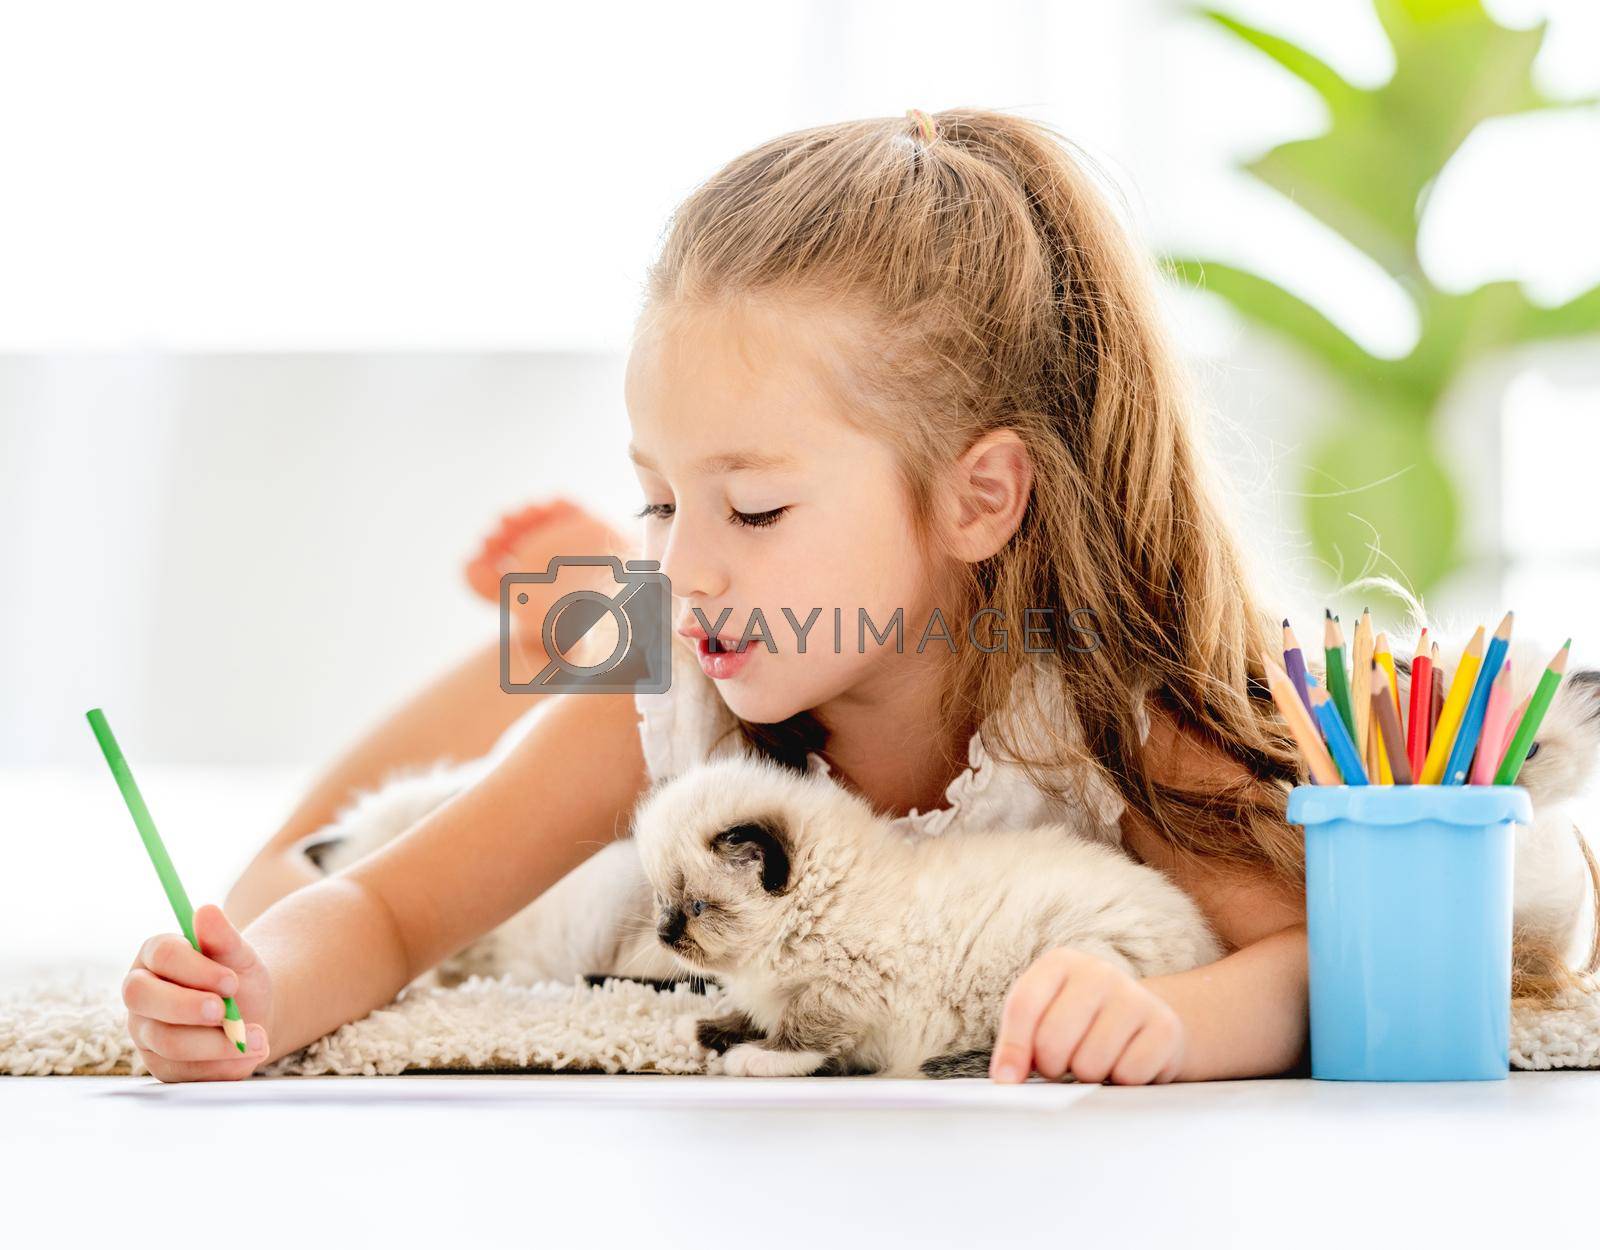 Child girl painting with ragdoll kittens and lying on the floor. Little female person drawing with colorful pencils and kitty pets close to her at home